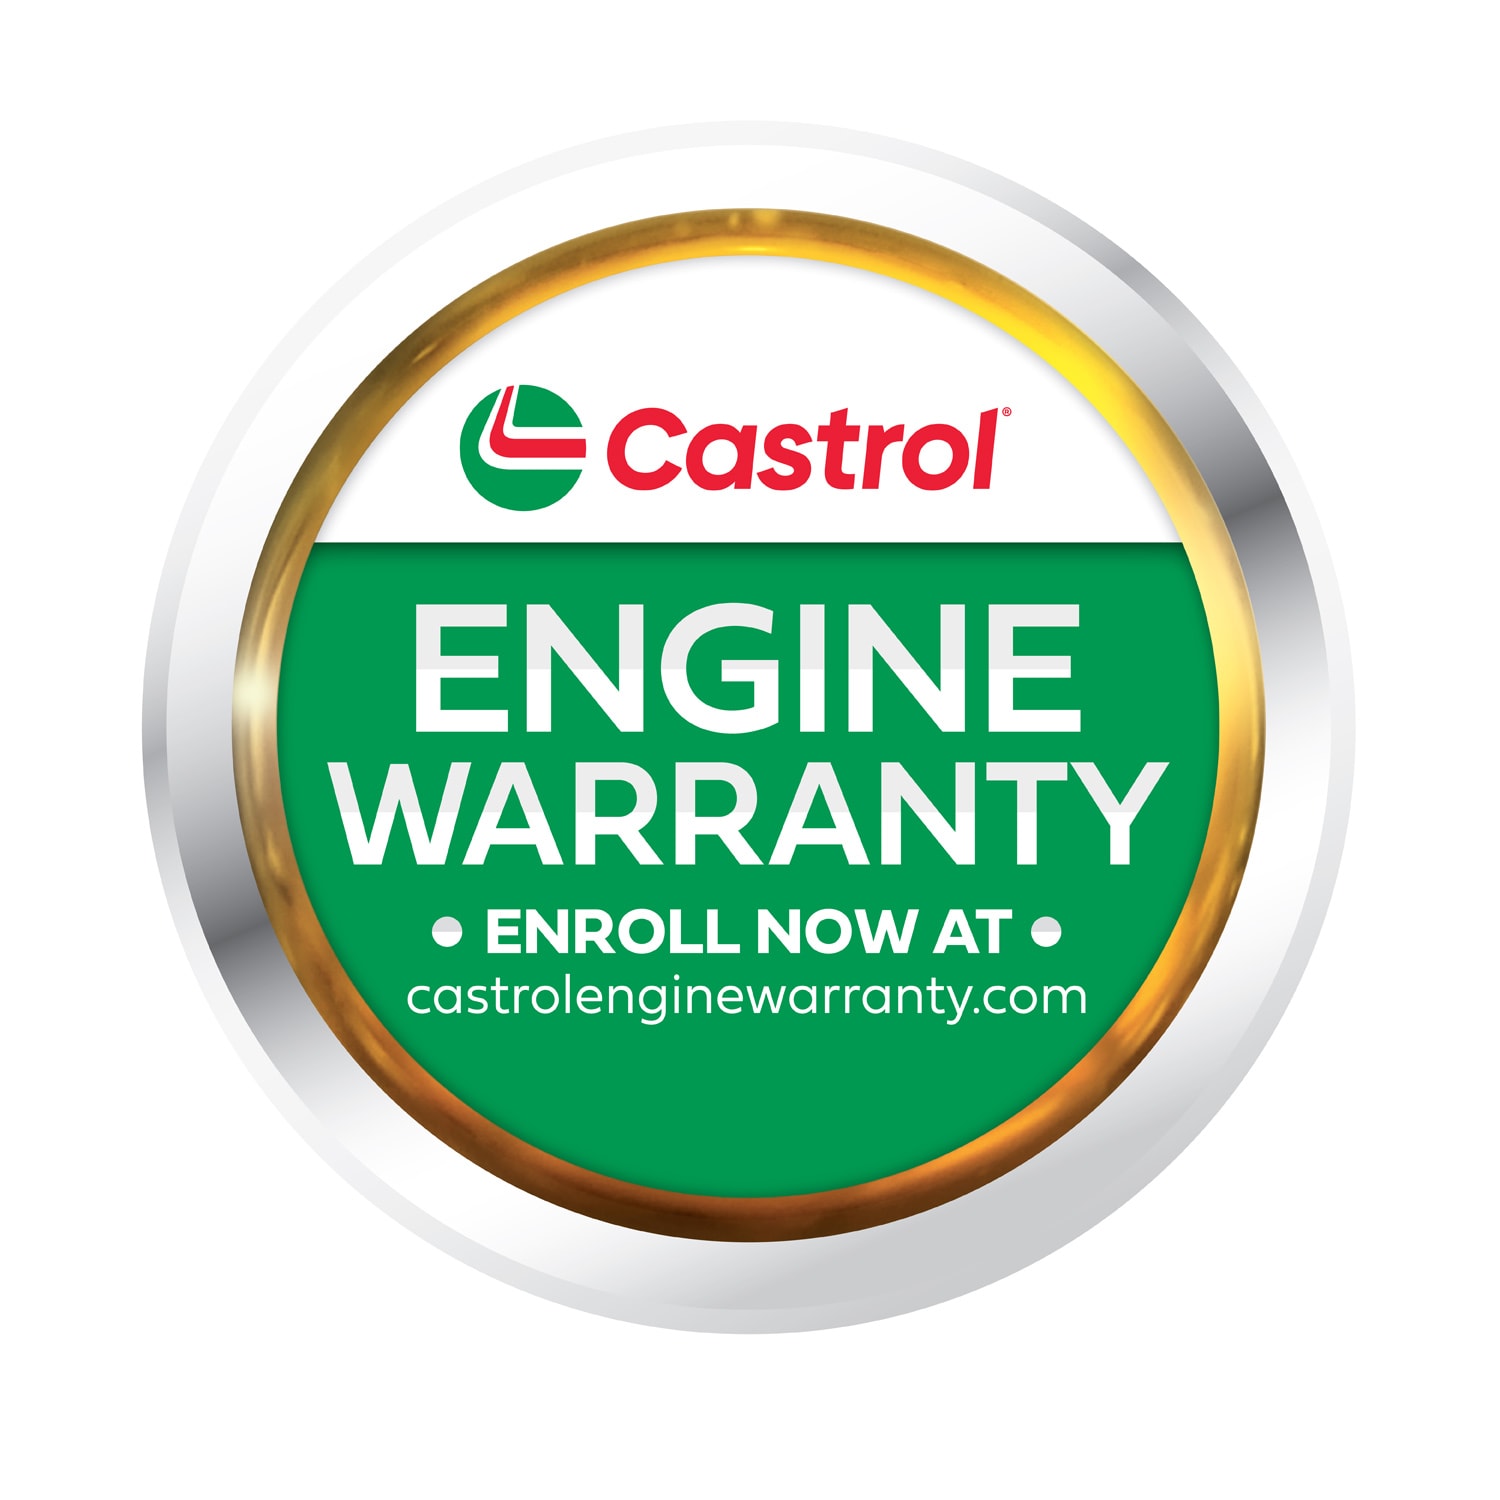 CASTROL Edge 5w-30 5 Qt in the Motor Oil u0026 Additives department at Lowes.com